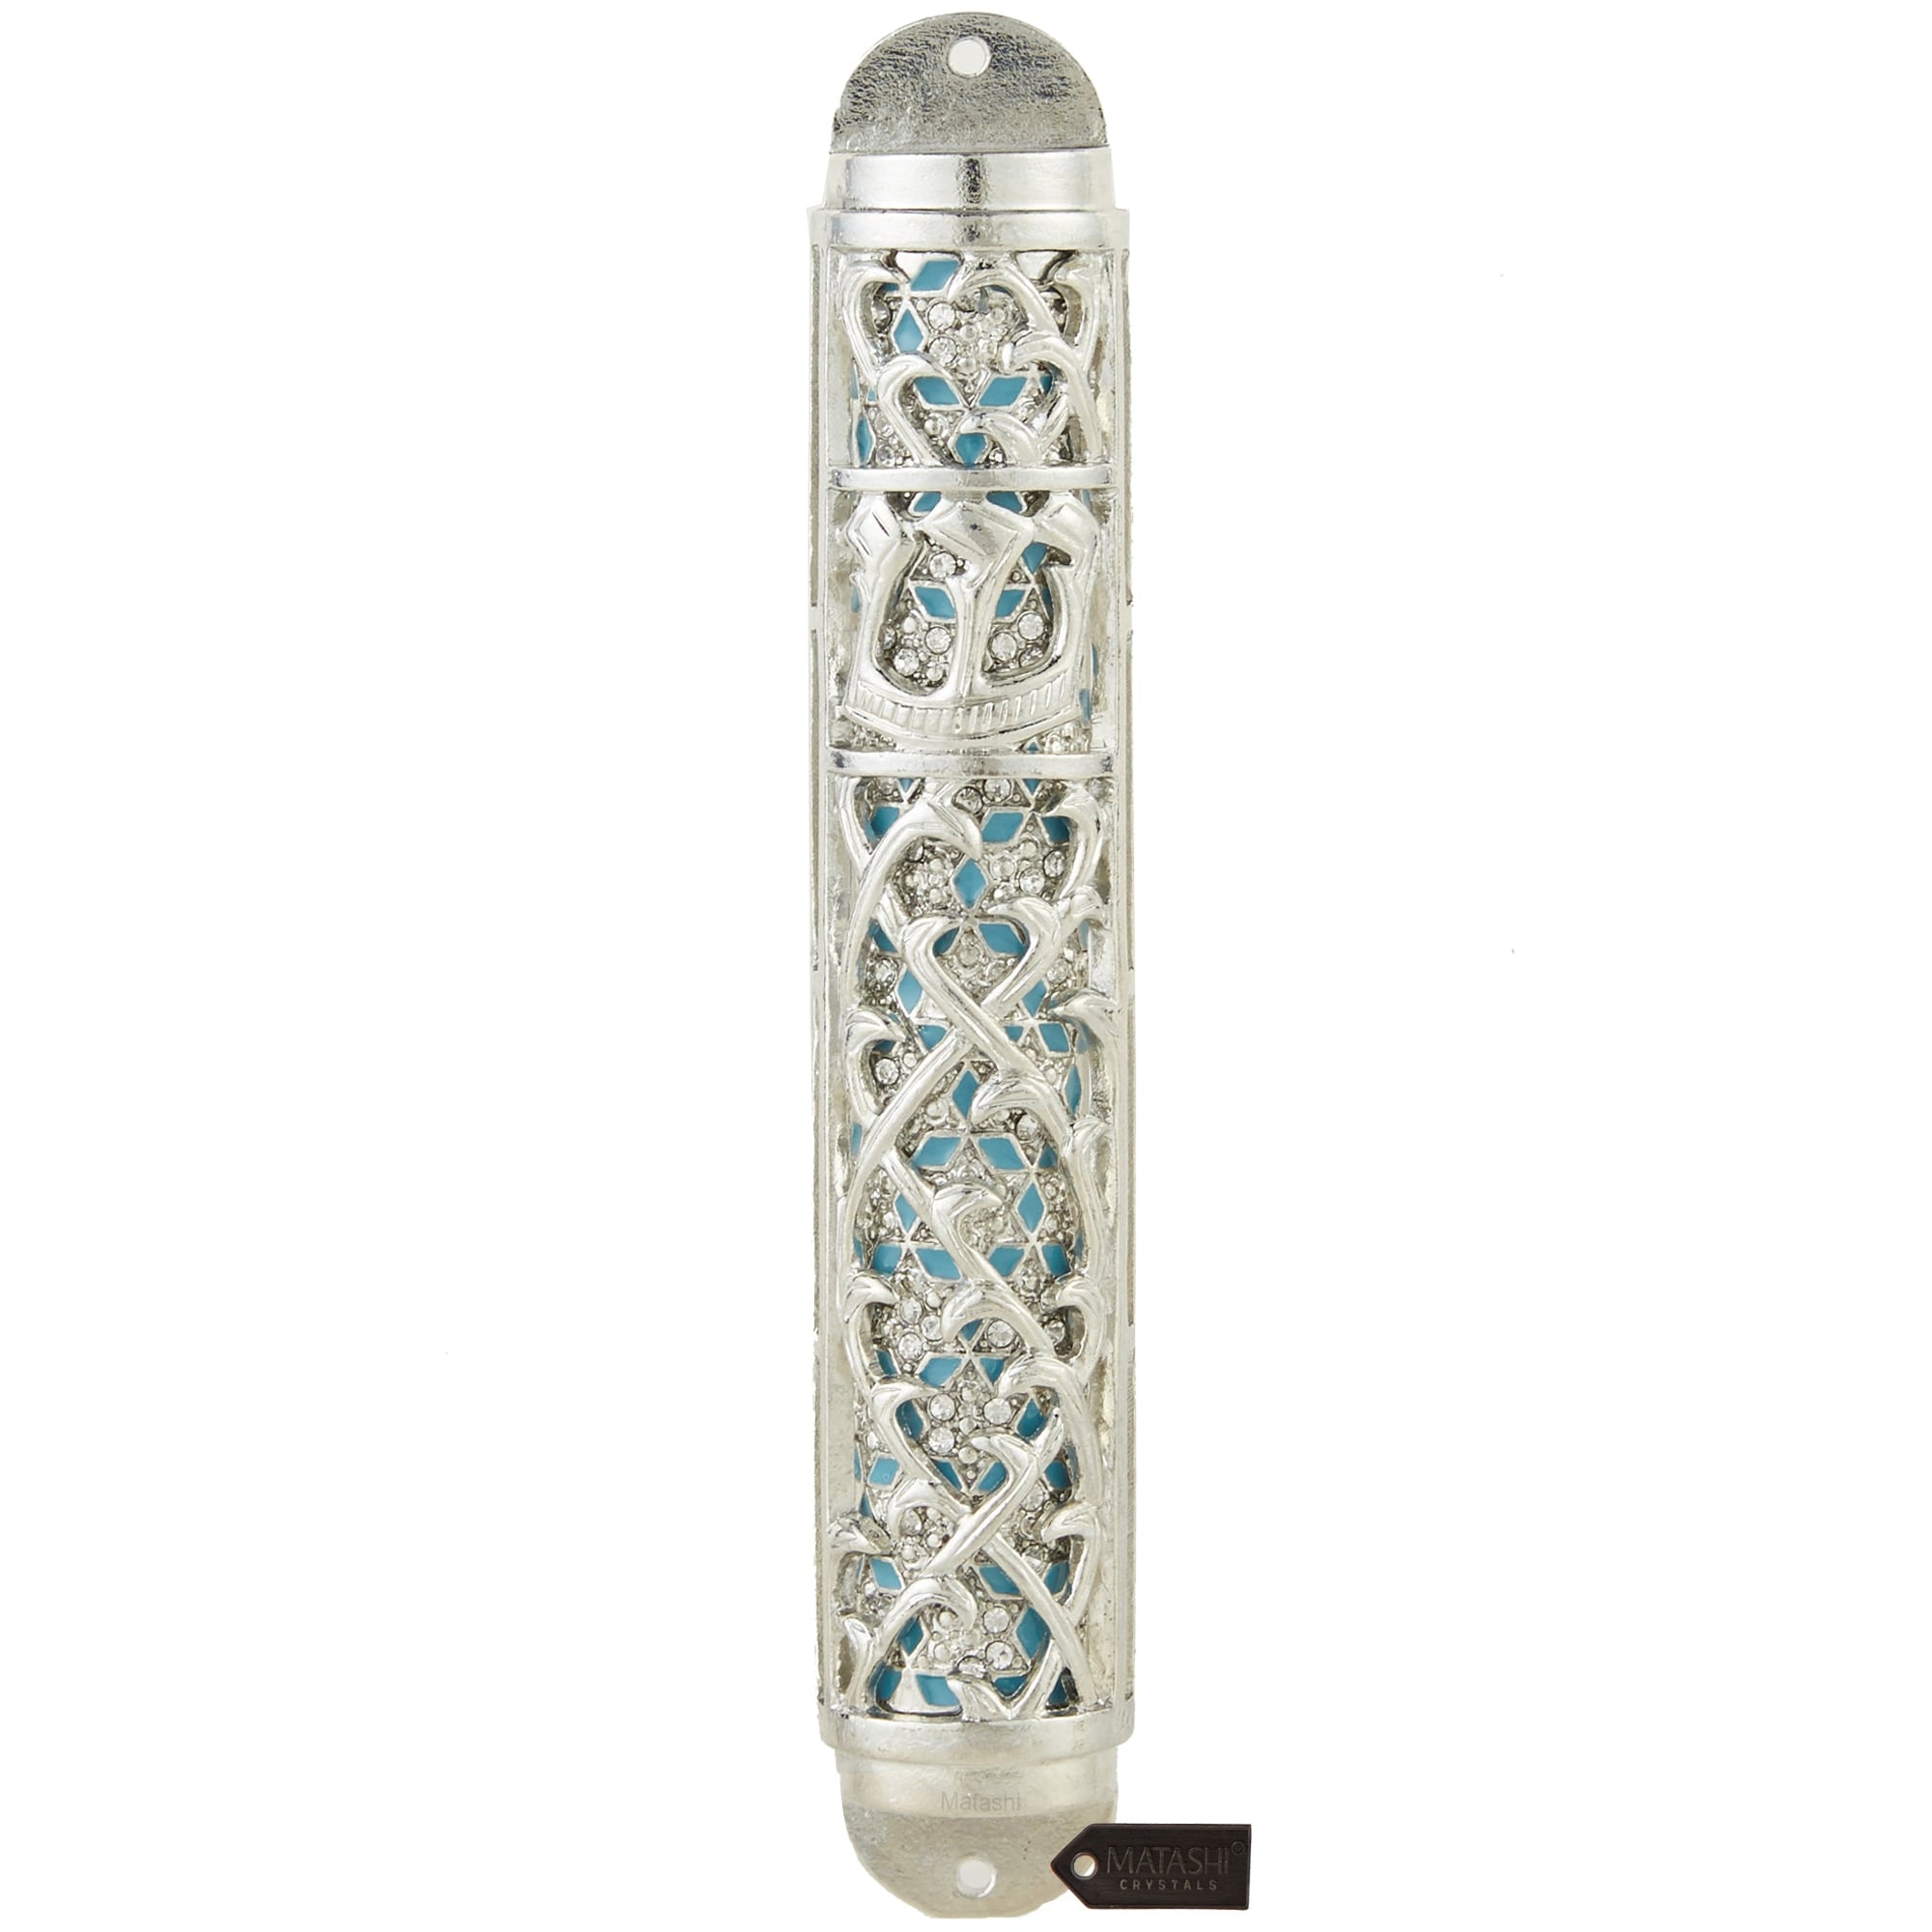 https://ak1.ostkcdn.com/images/products/is/images/direct/f508a82dc8243e84258365e7330a87ed608ba995/Matashi-Hand-Painted-Enamel-Mezuzah-w-Hebrew-Shin-%26-Crystals-Home-Decor-for-Jewish-Holiday-House-Blessing-Gift-for-Holiday.jpg